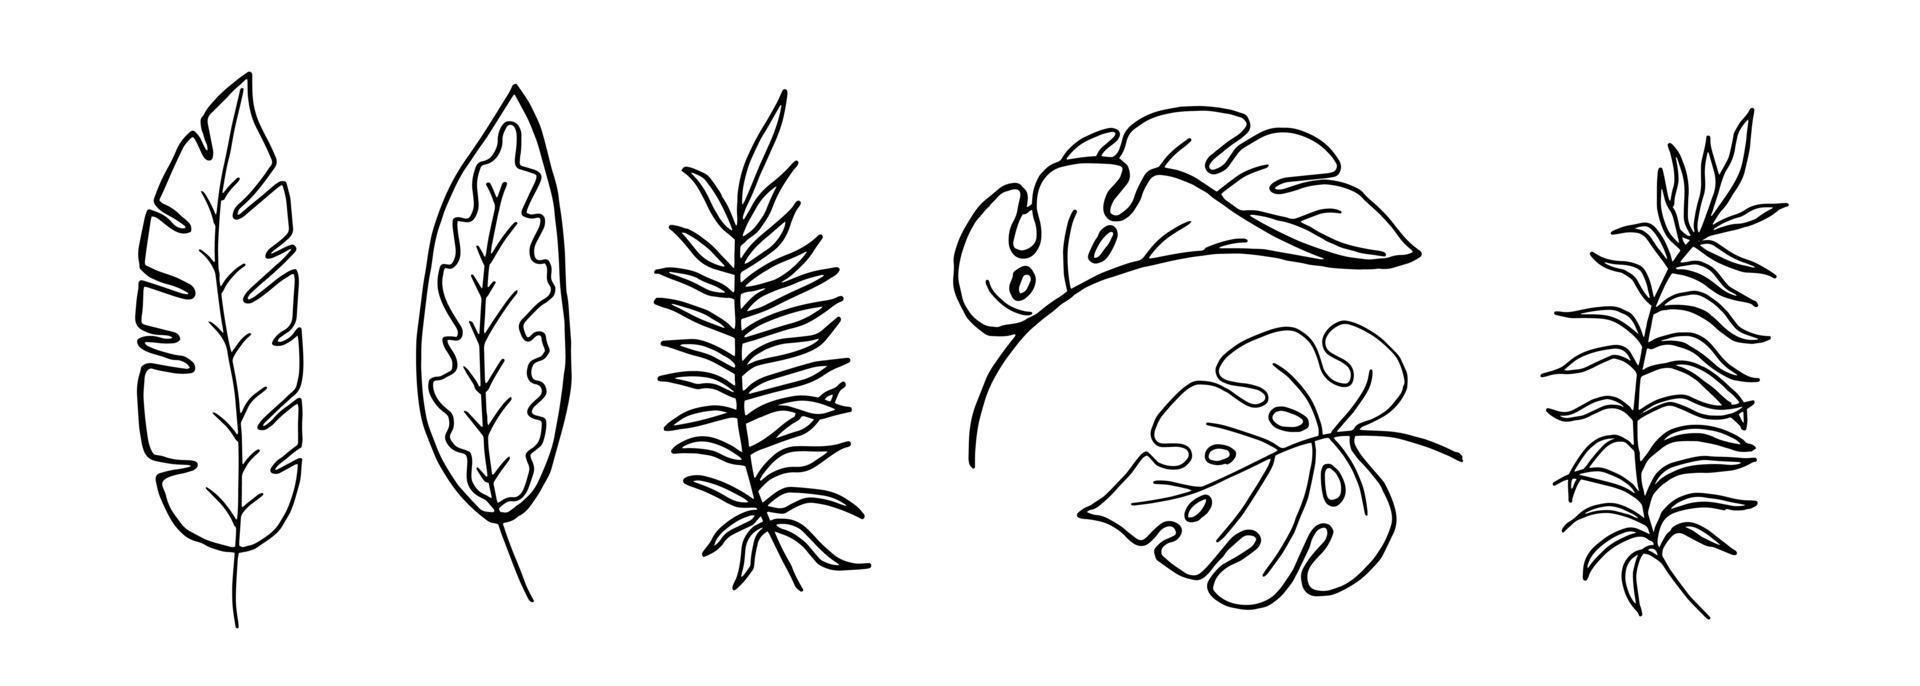 Tropical leaves set hand drawing sketch doodle style isolated on white background.Monstera and palm leaves.Vector stock illustration. vector